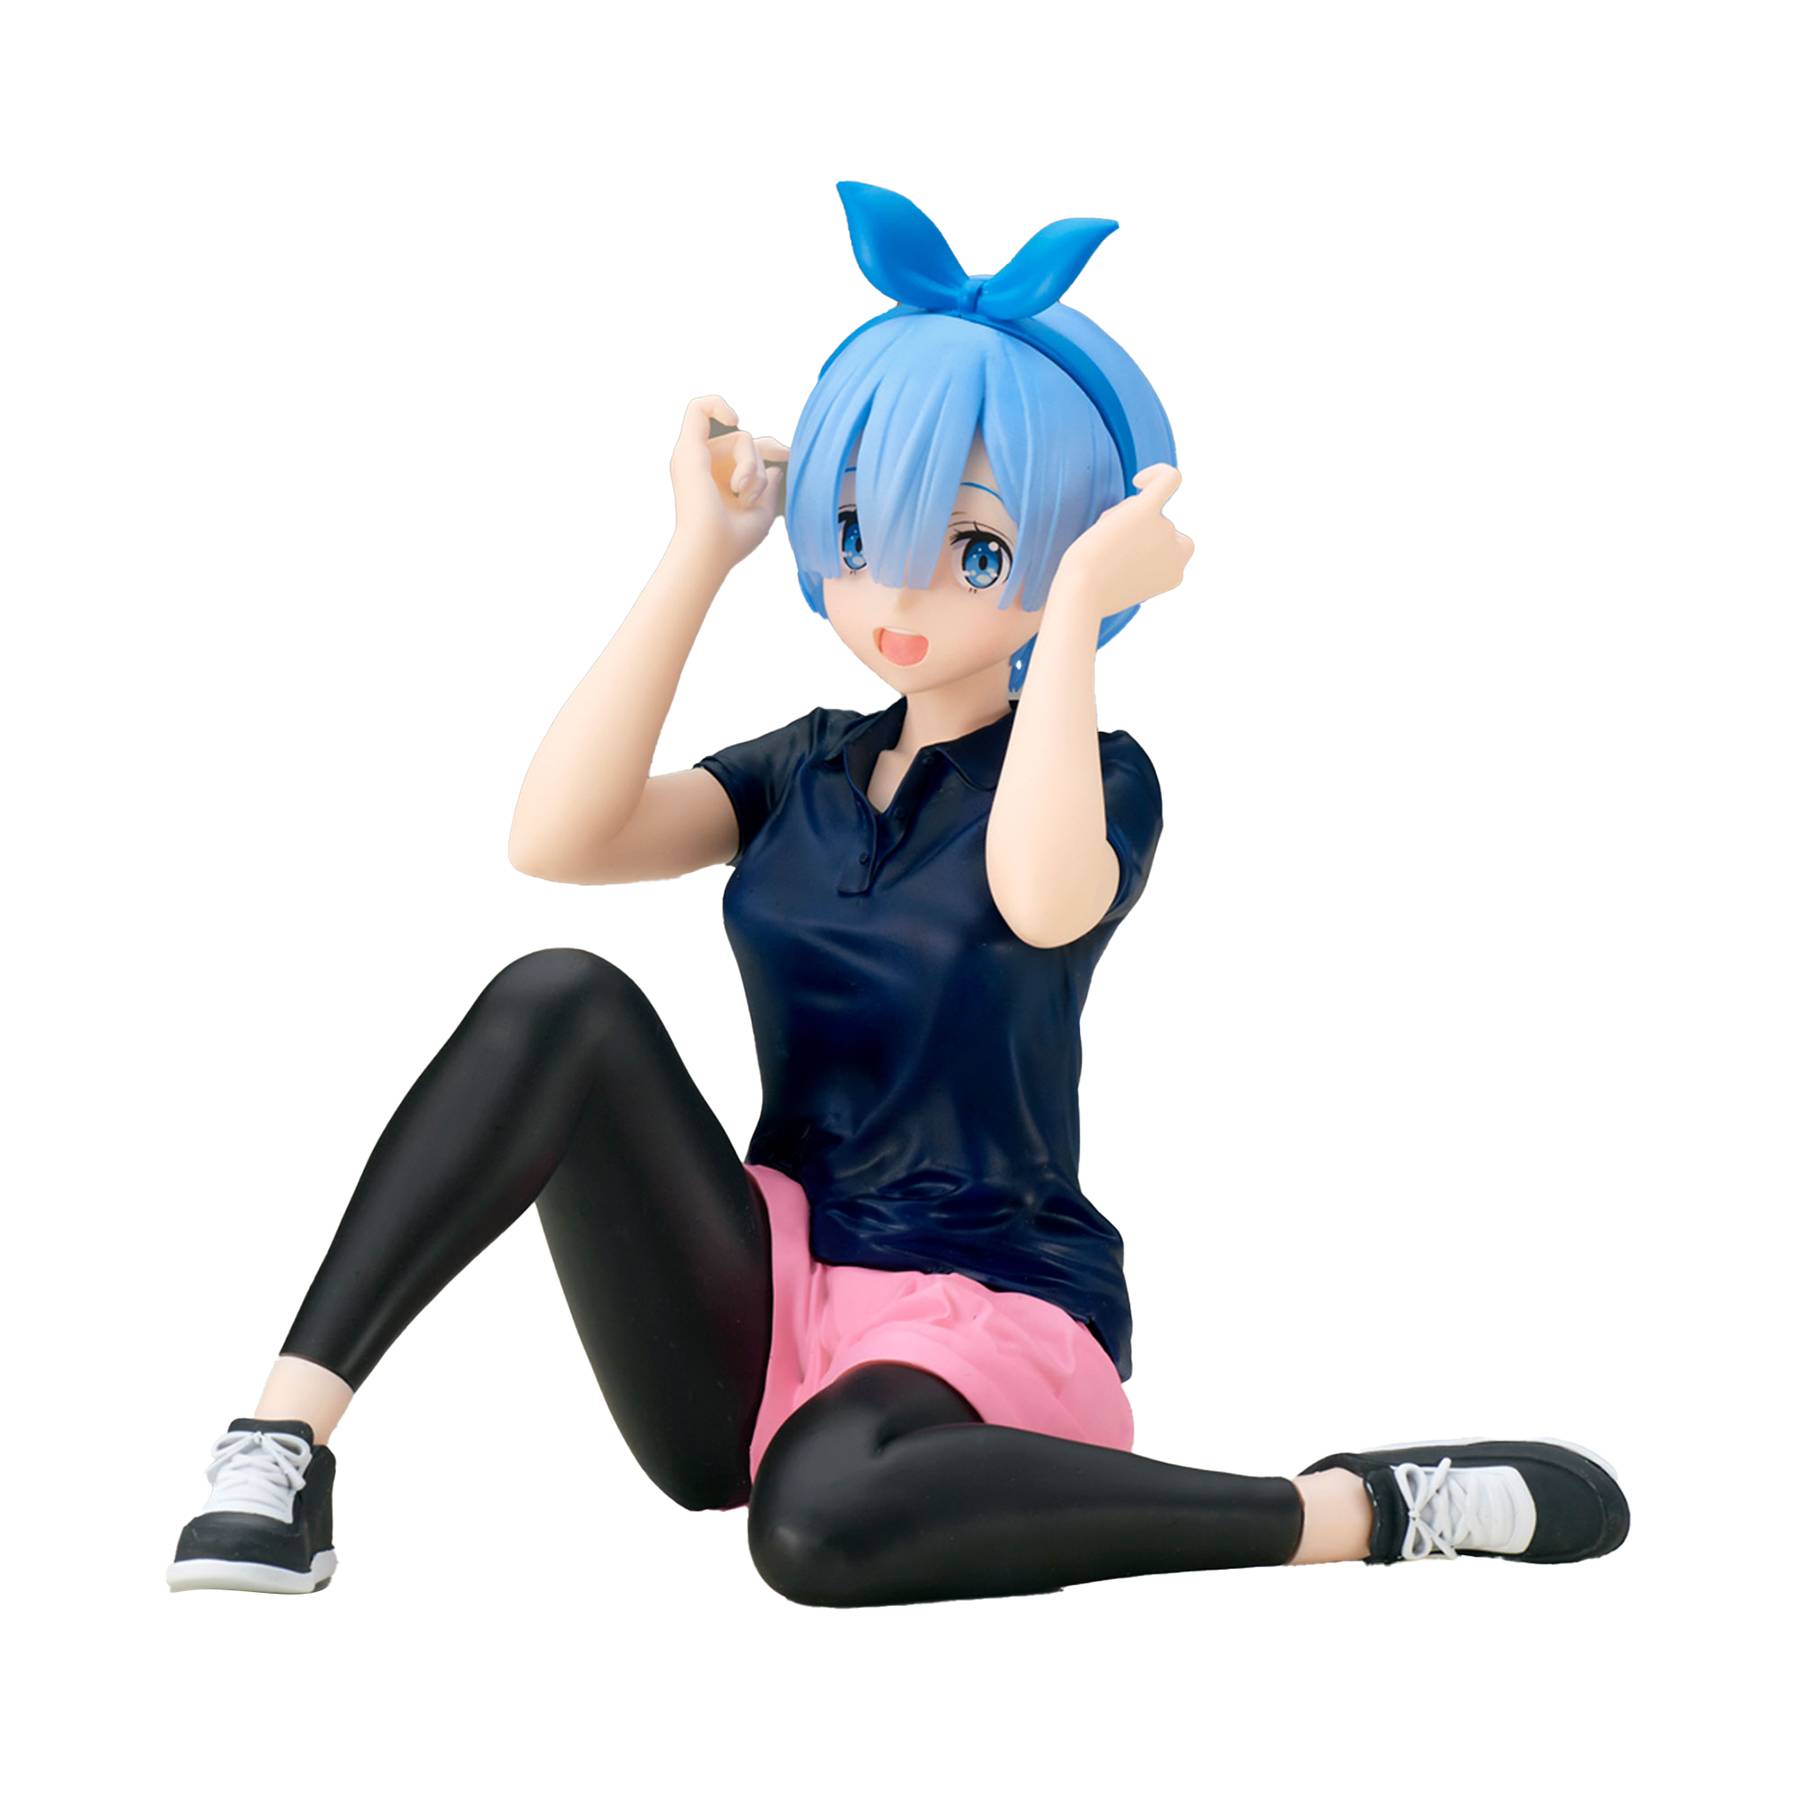 RE ZERO STARTING LIFE RELAX TIME REM TRAINING STYLE PVC FIG